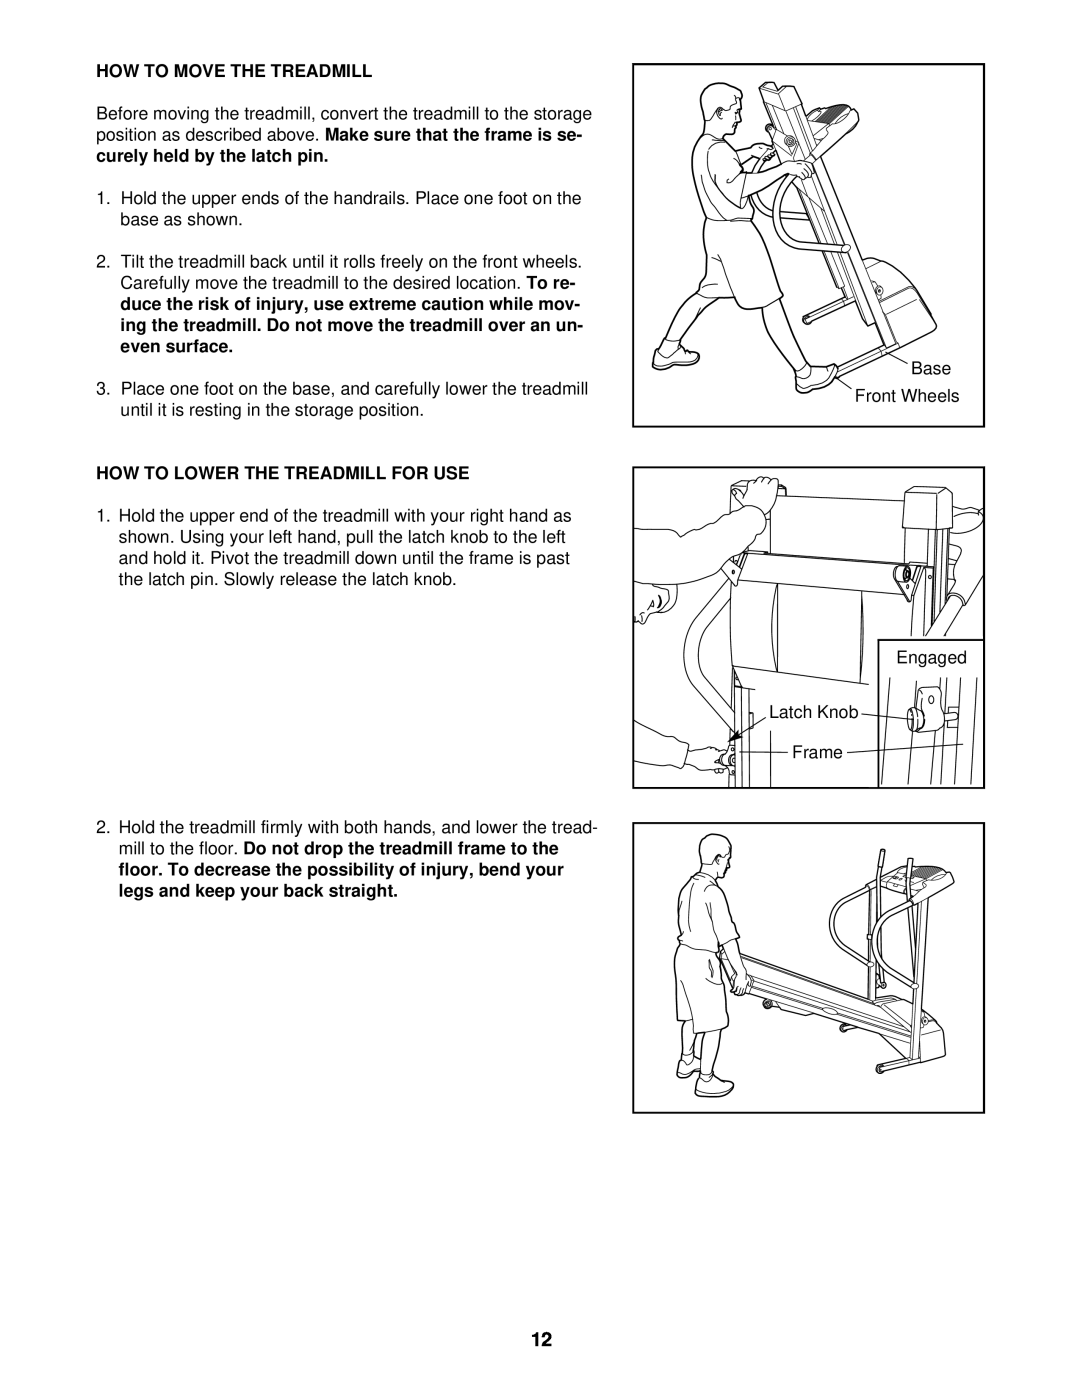 ProForm 831.293230 How To Move The Treadmill, Carefully move the treadmill to the desired location, even surface 